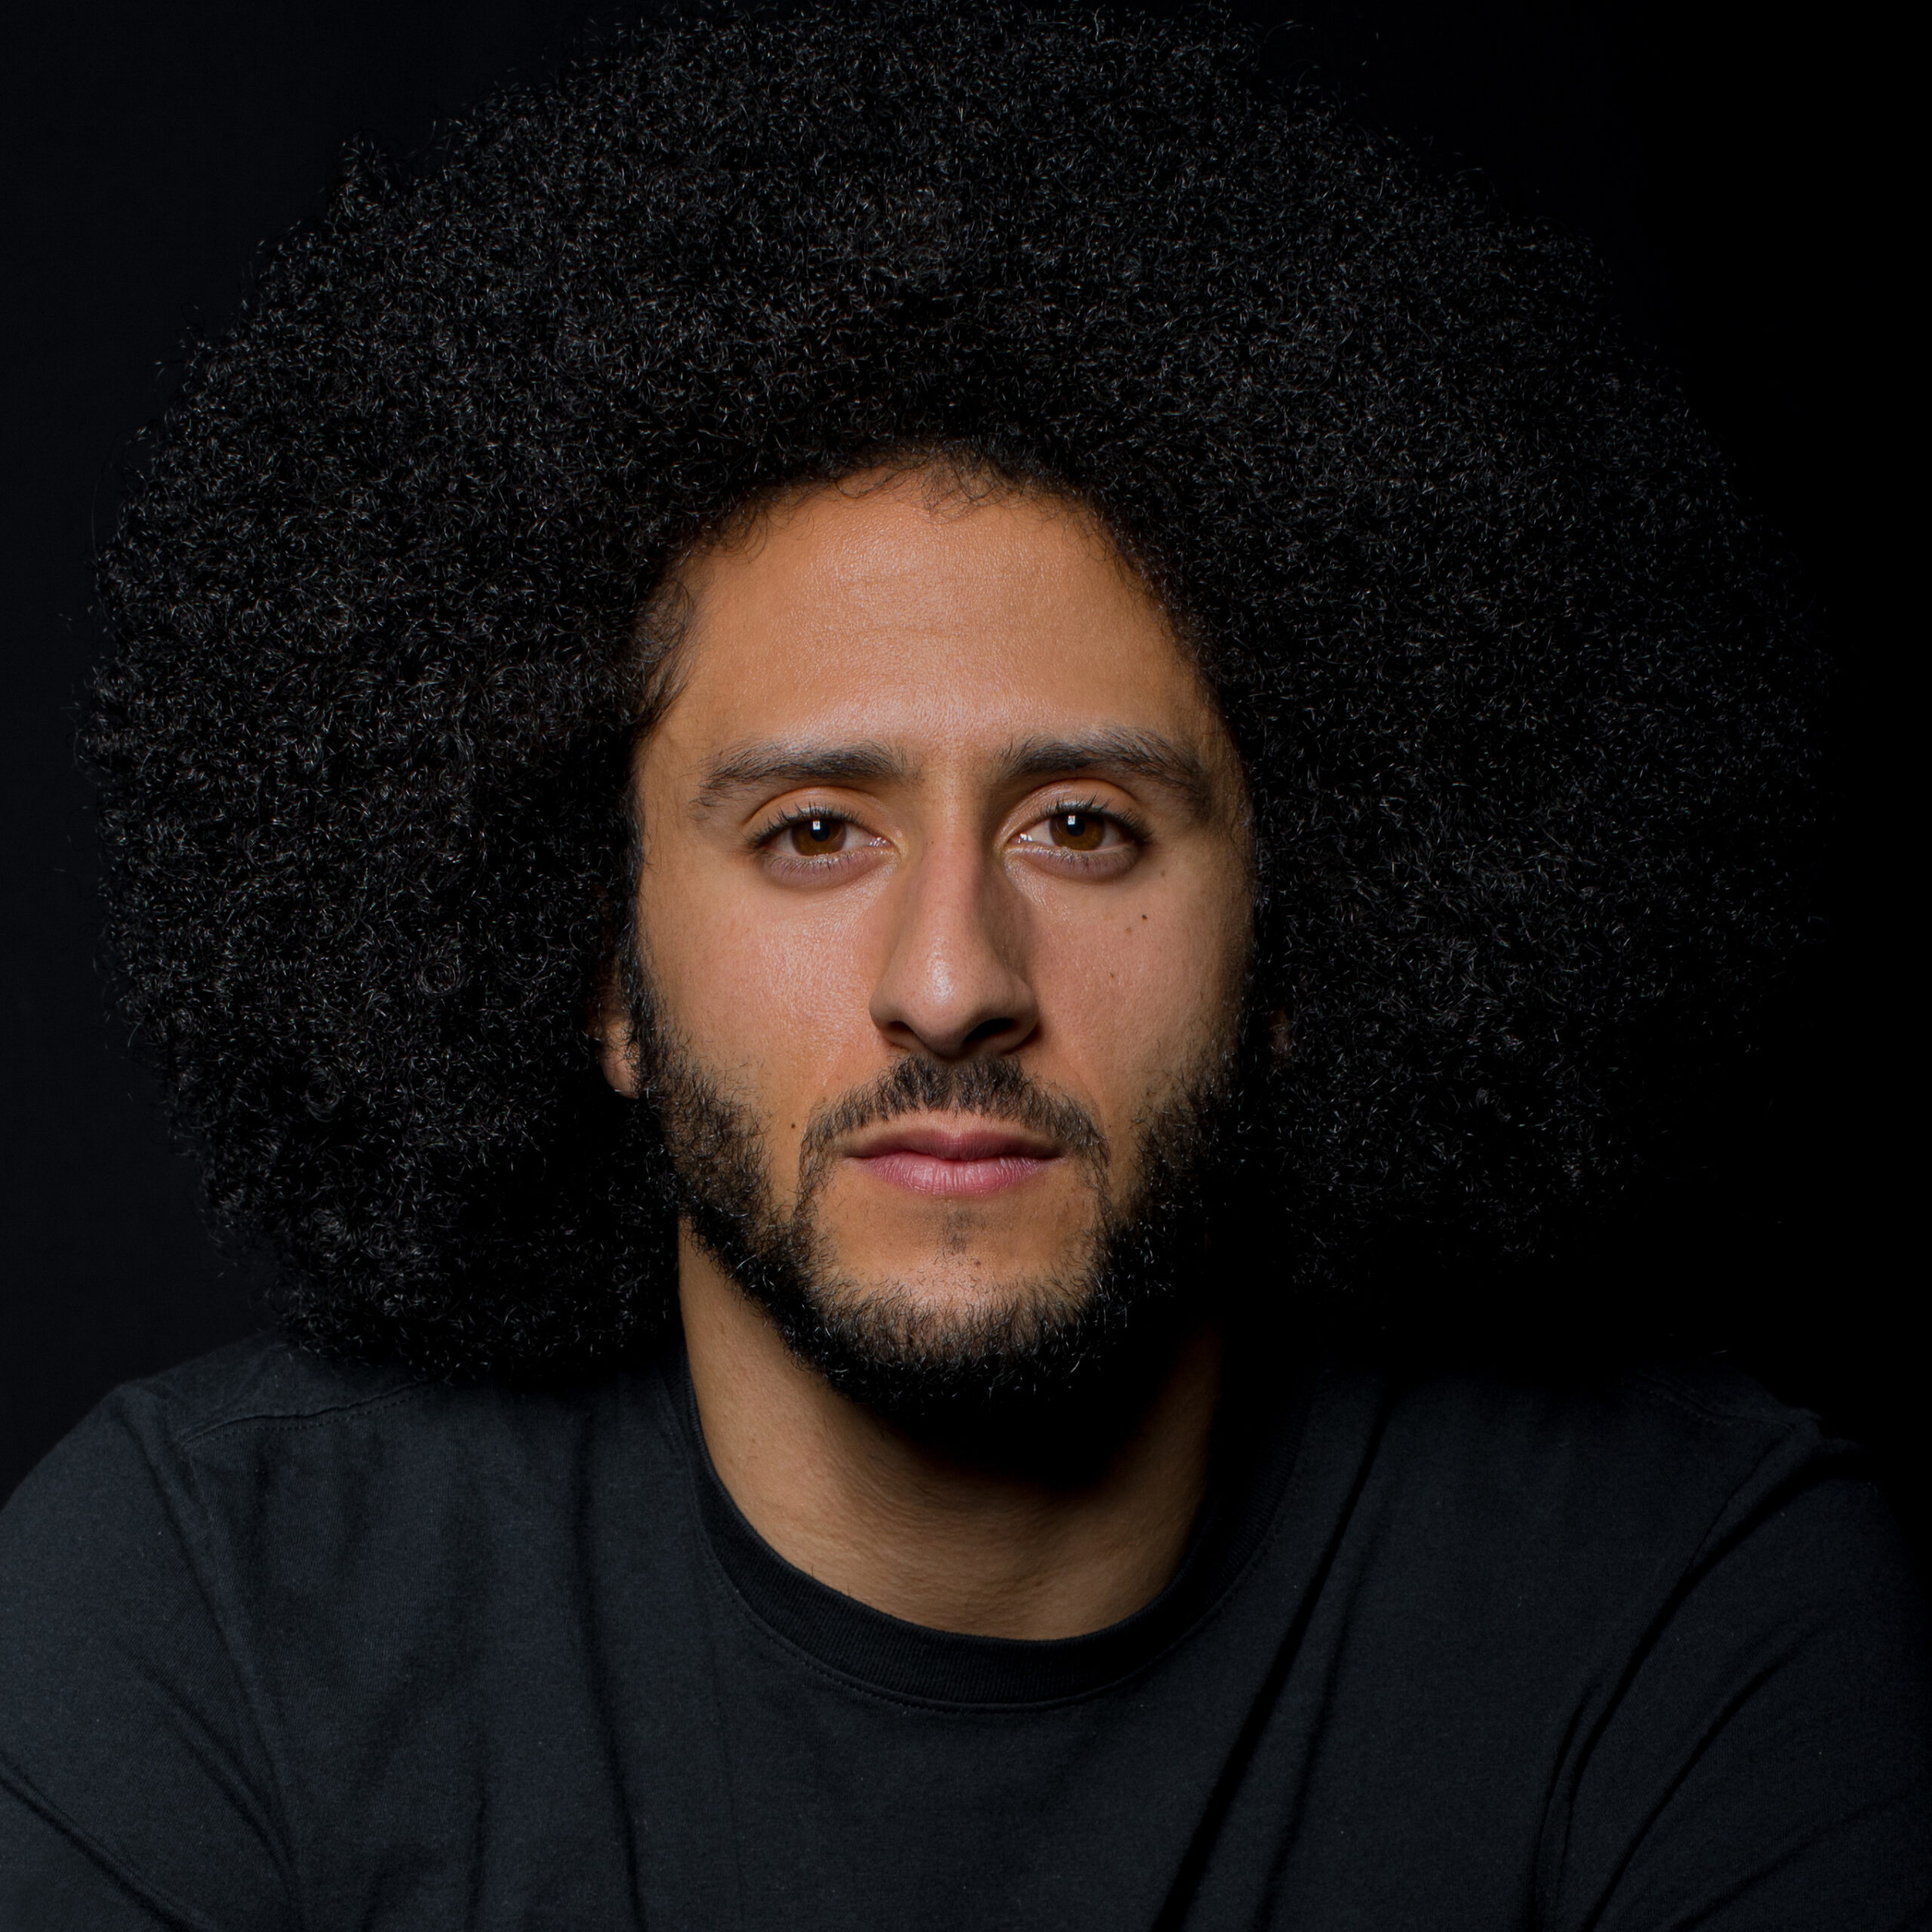 Colin Kaepernick describes how he embraced his blackness as a teenager